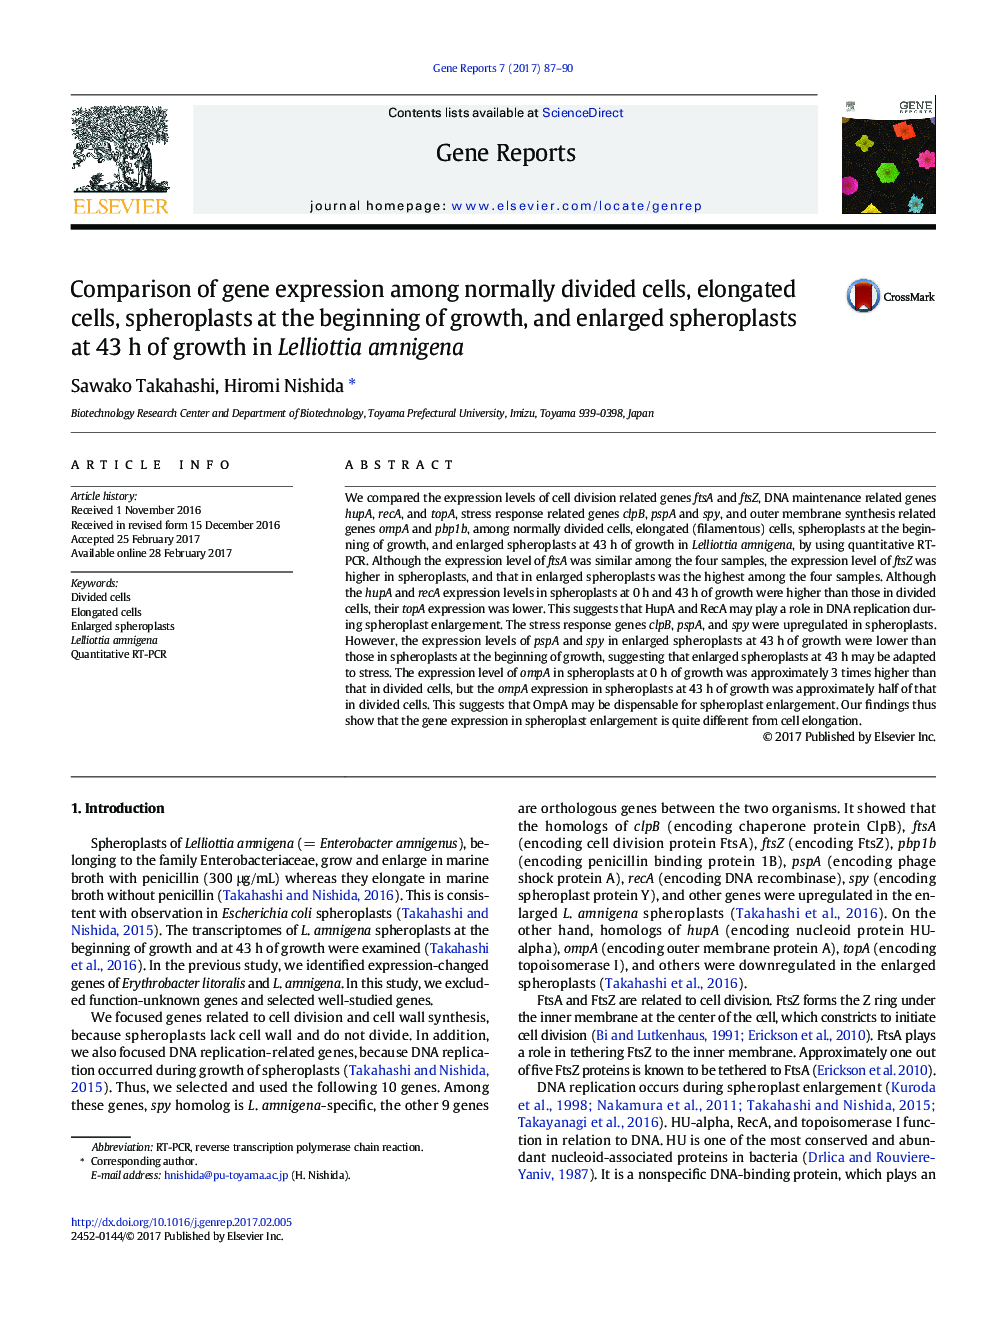 Comparison of gene expression among normally divided cells, elongated cells, spheroplasts at the beginning of growth, and enlarged spheroplasts at 43Â h of growth in Lelliottia amnigena